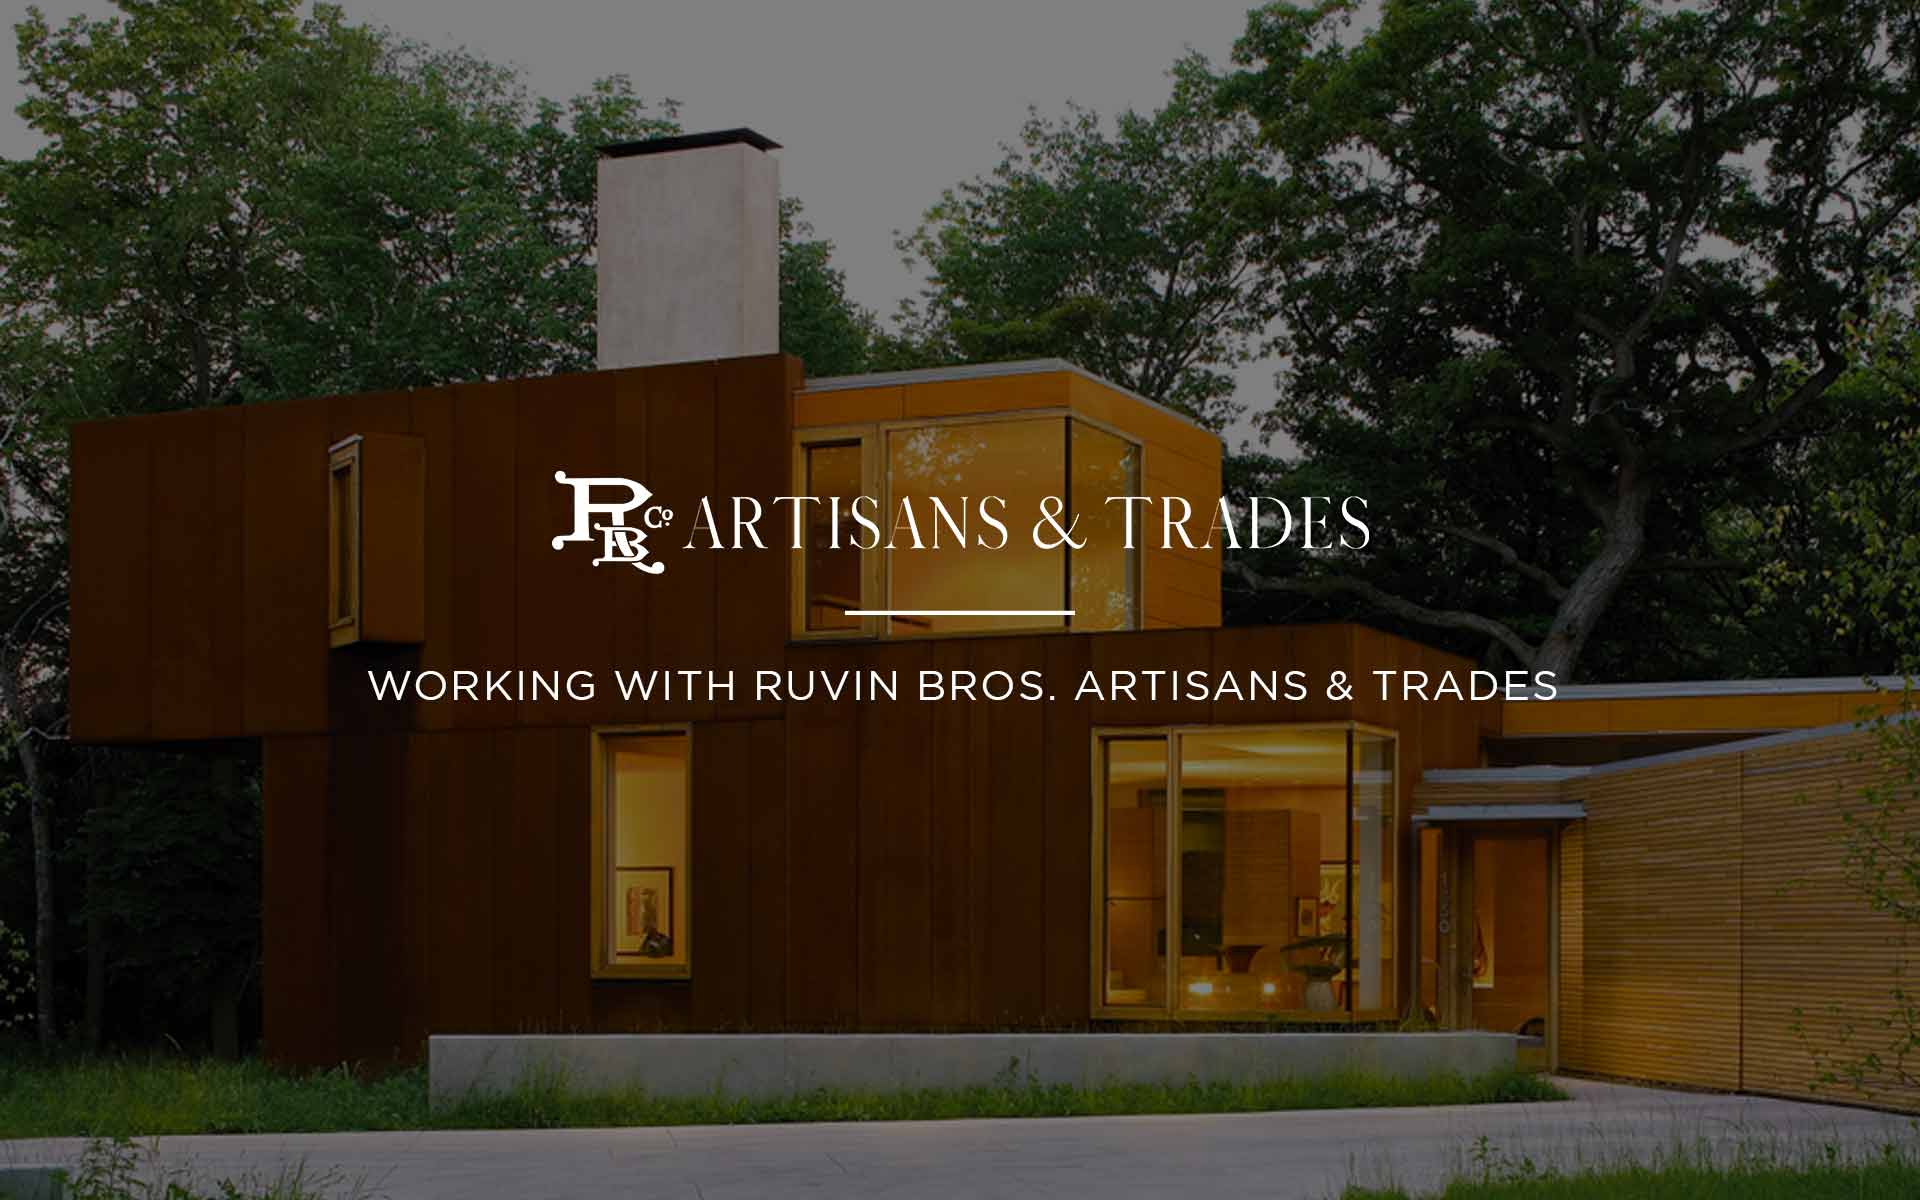 Working with Ruvin Bros. Artisans & Trades